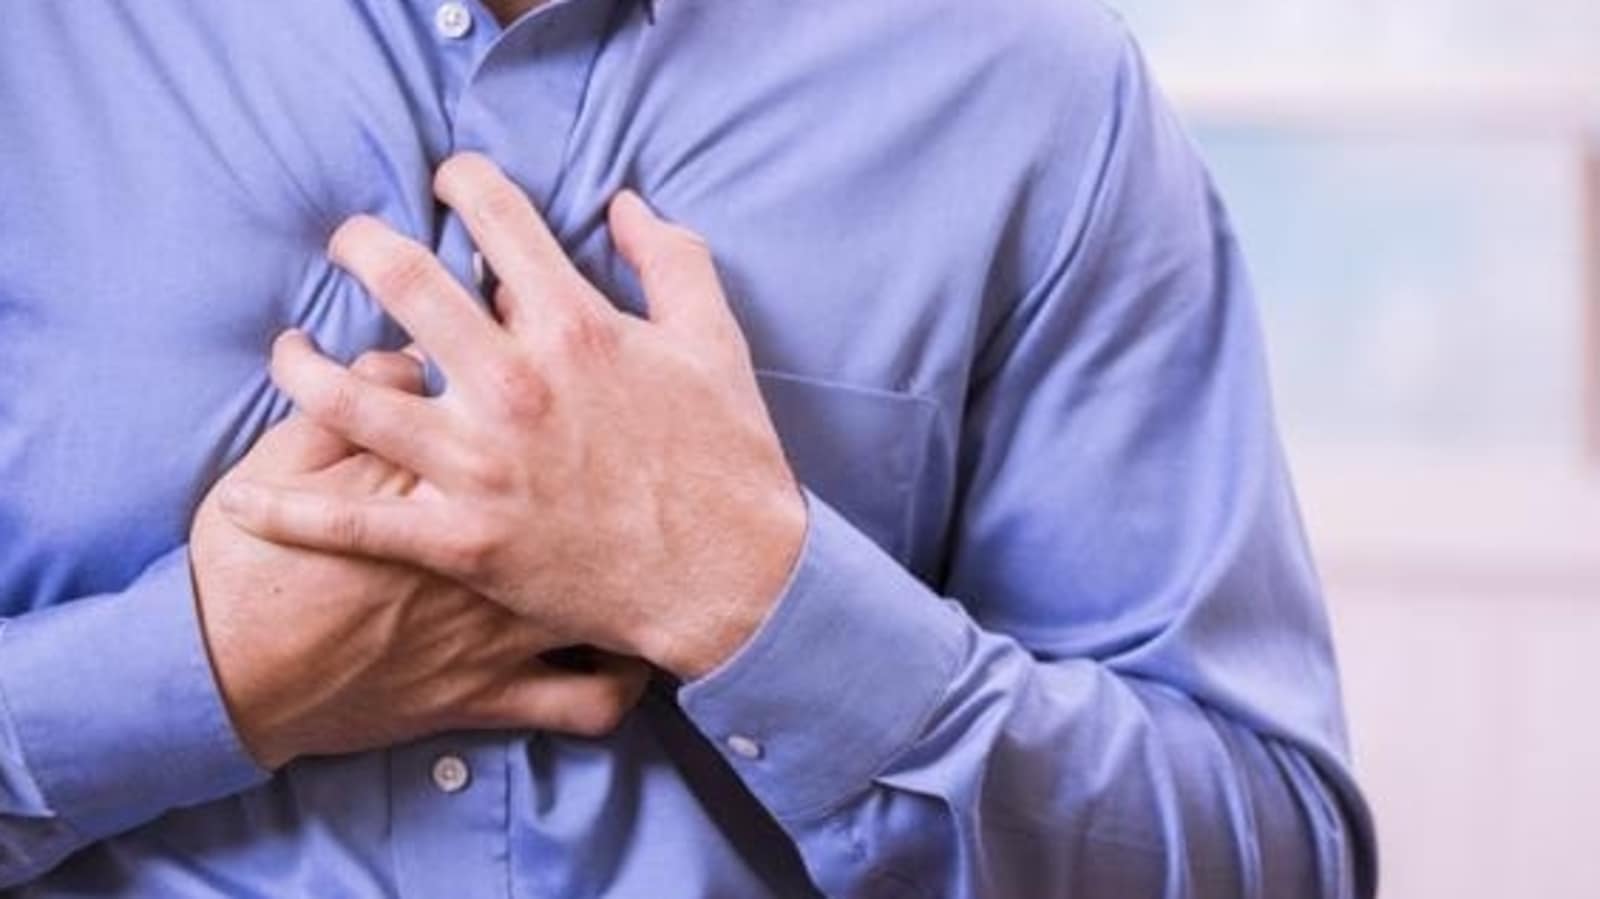 These are the most common heart attack symptoms according to a study